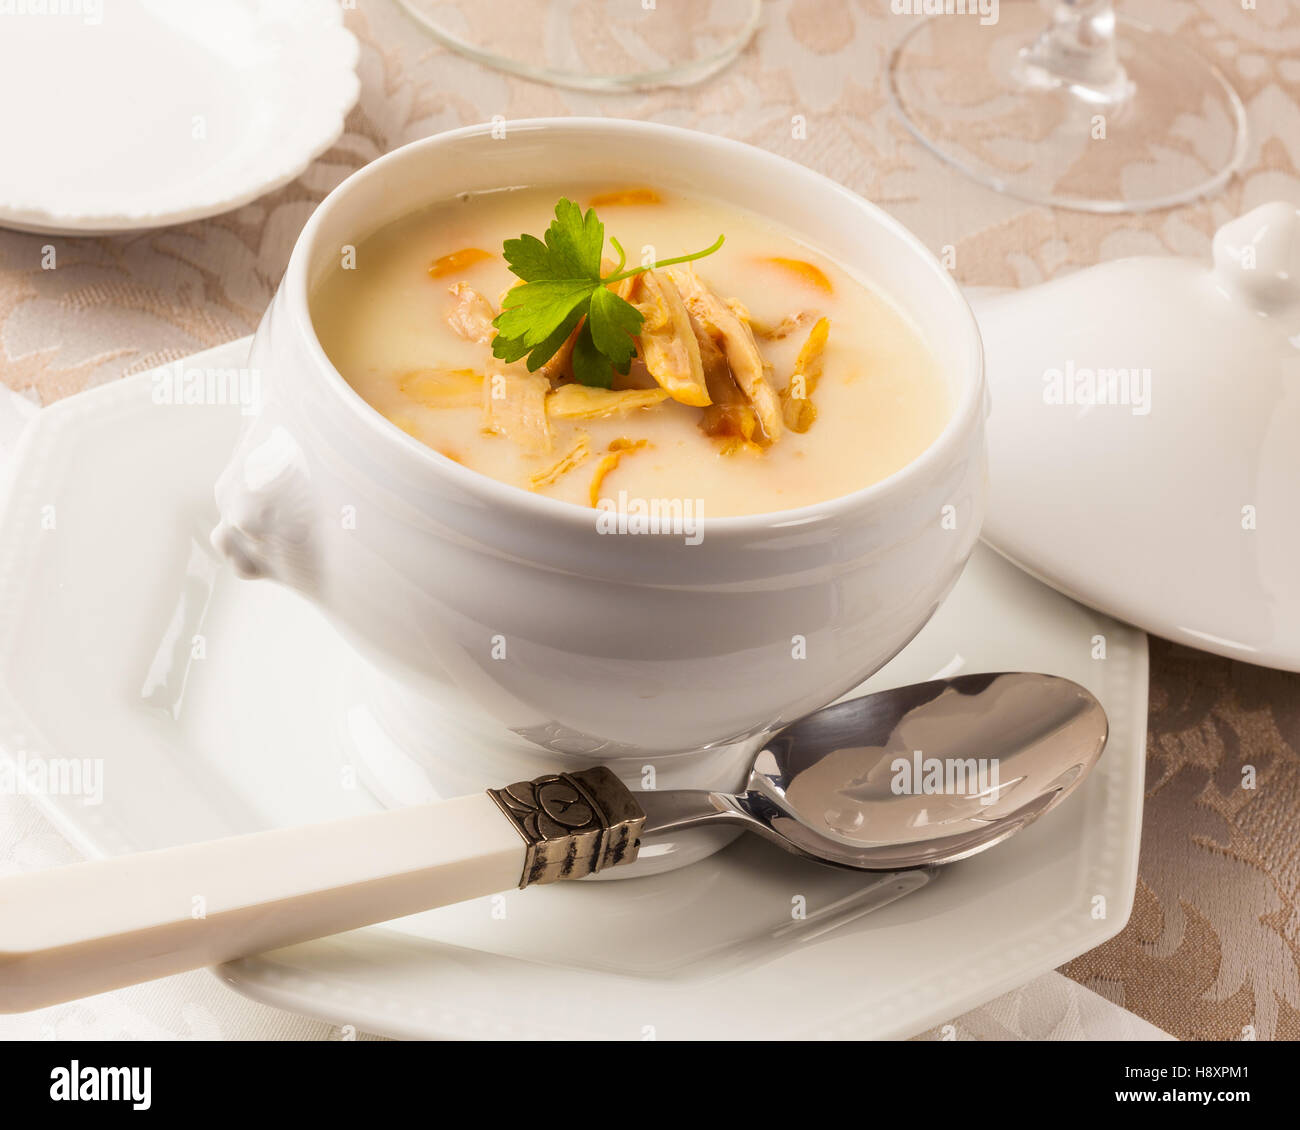 A bowl of chicken cream soup on a dinner table. Stock Photo